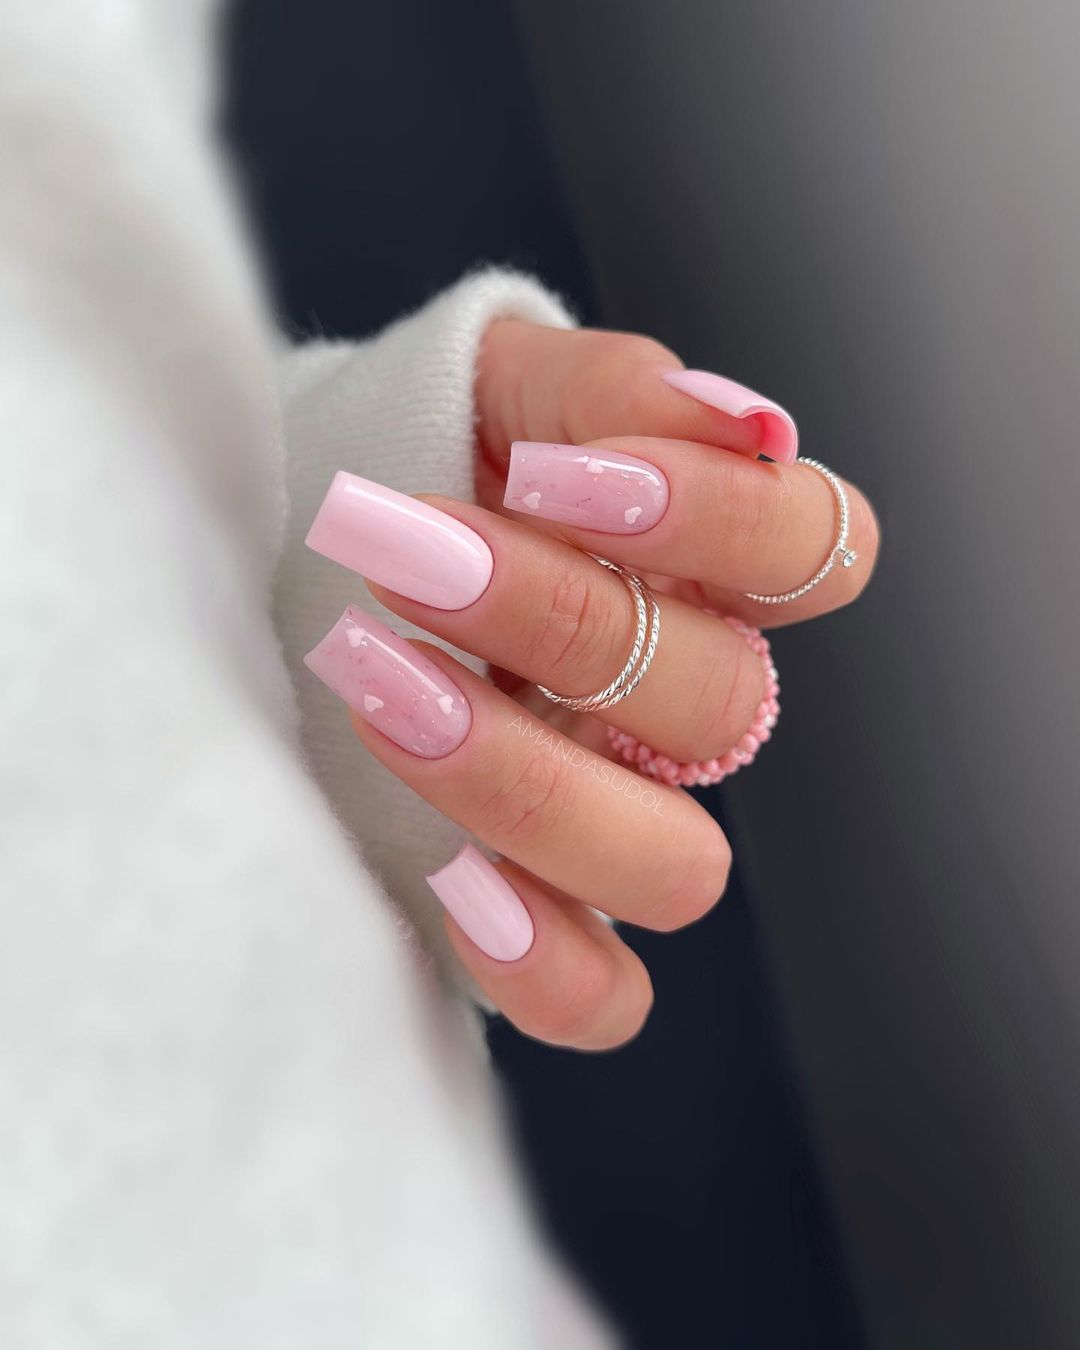 40 Current Nail Trends to Inspire You